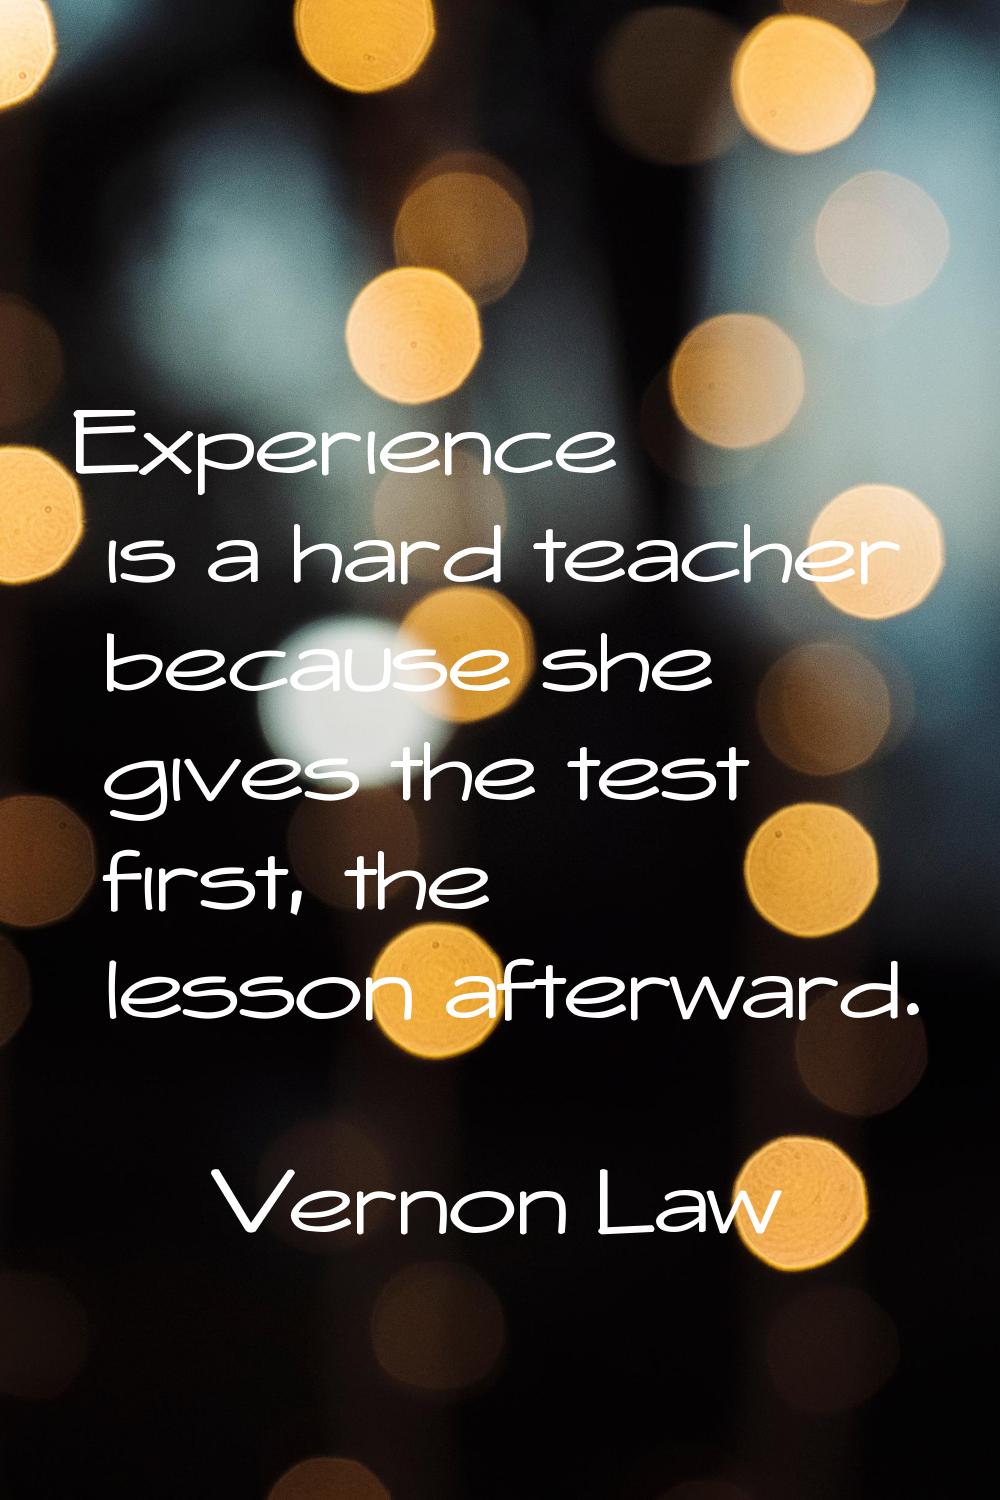 Experience is a hard teacher because she gives the test first, the lesson afterward.